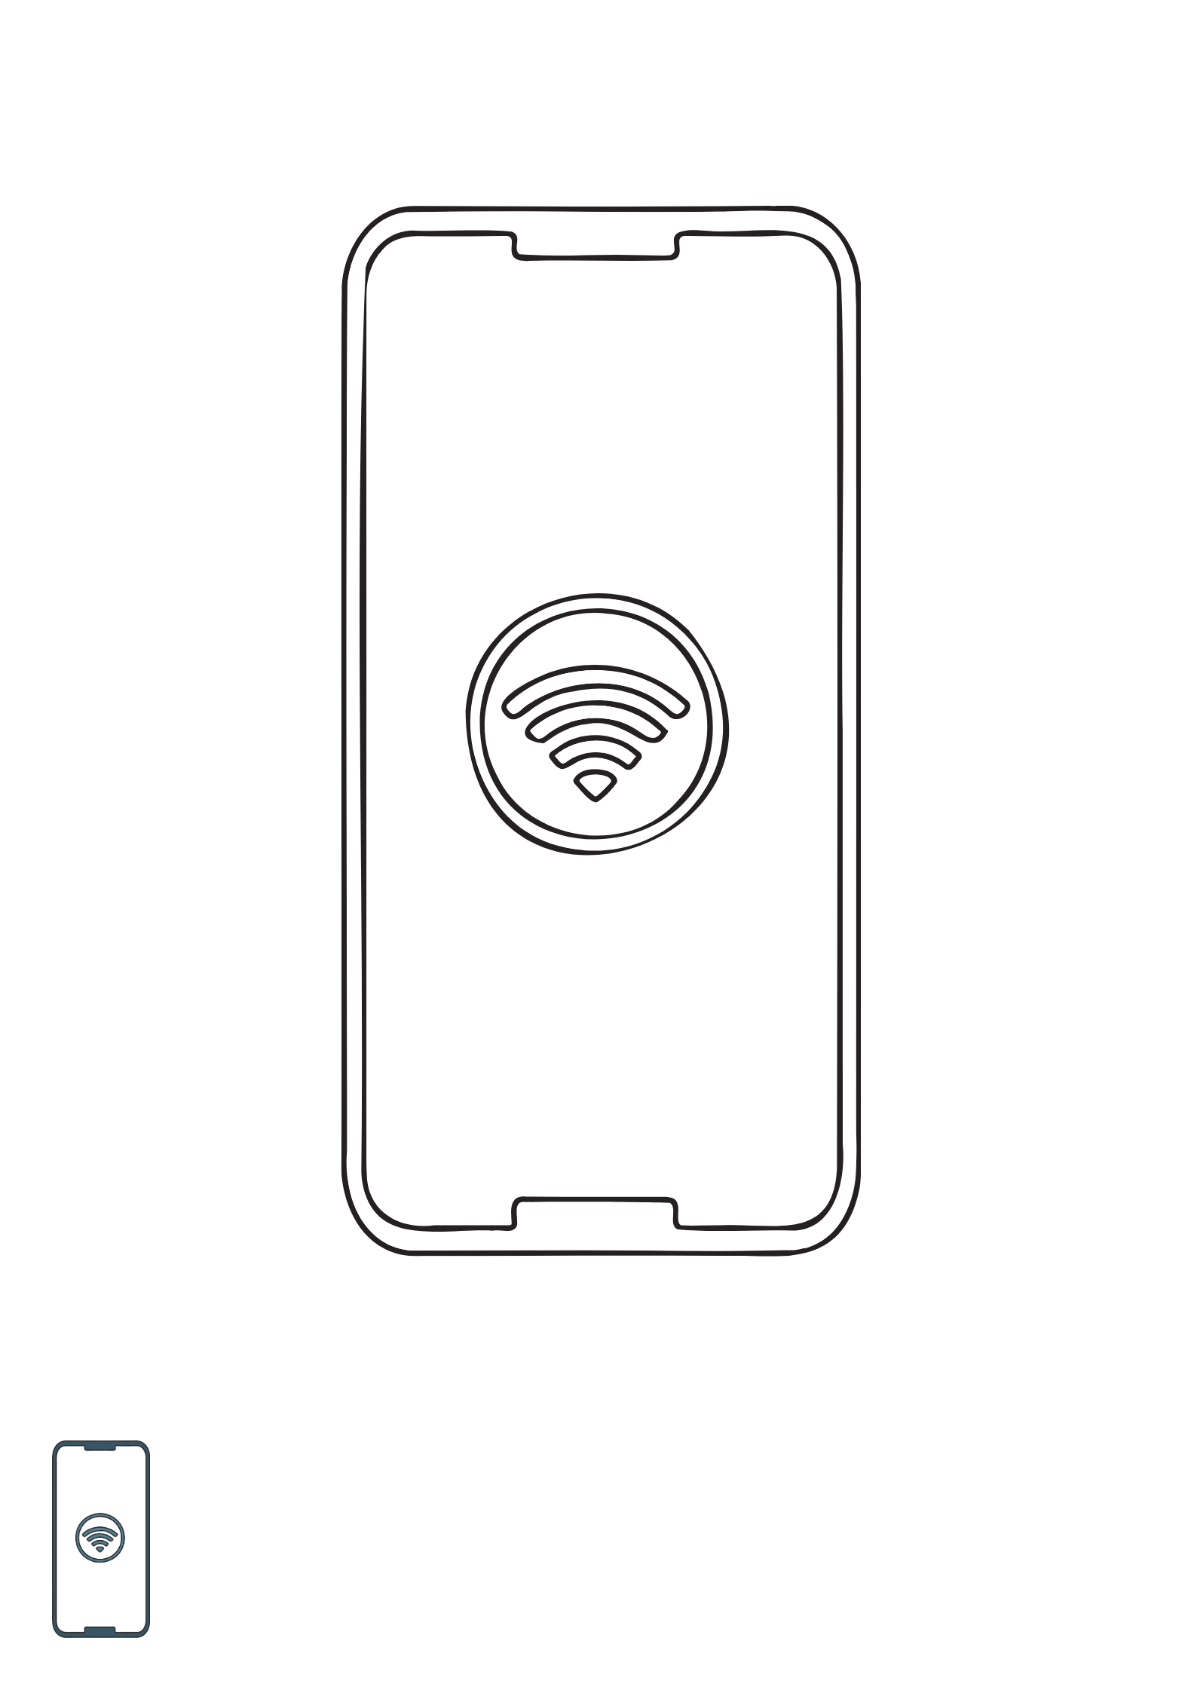 Mobile Wifi coloring page Template